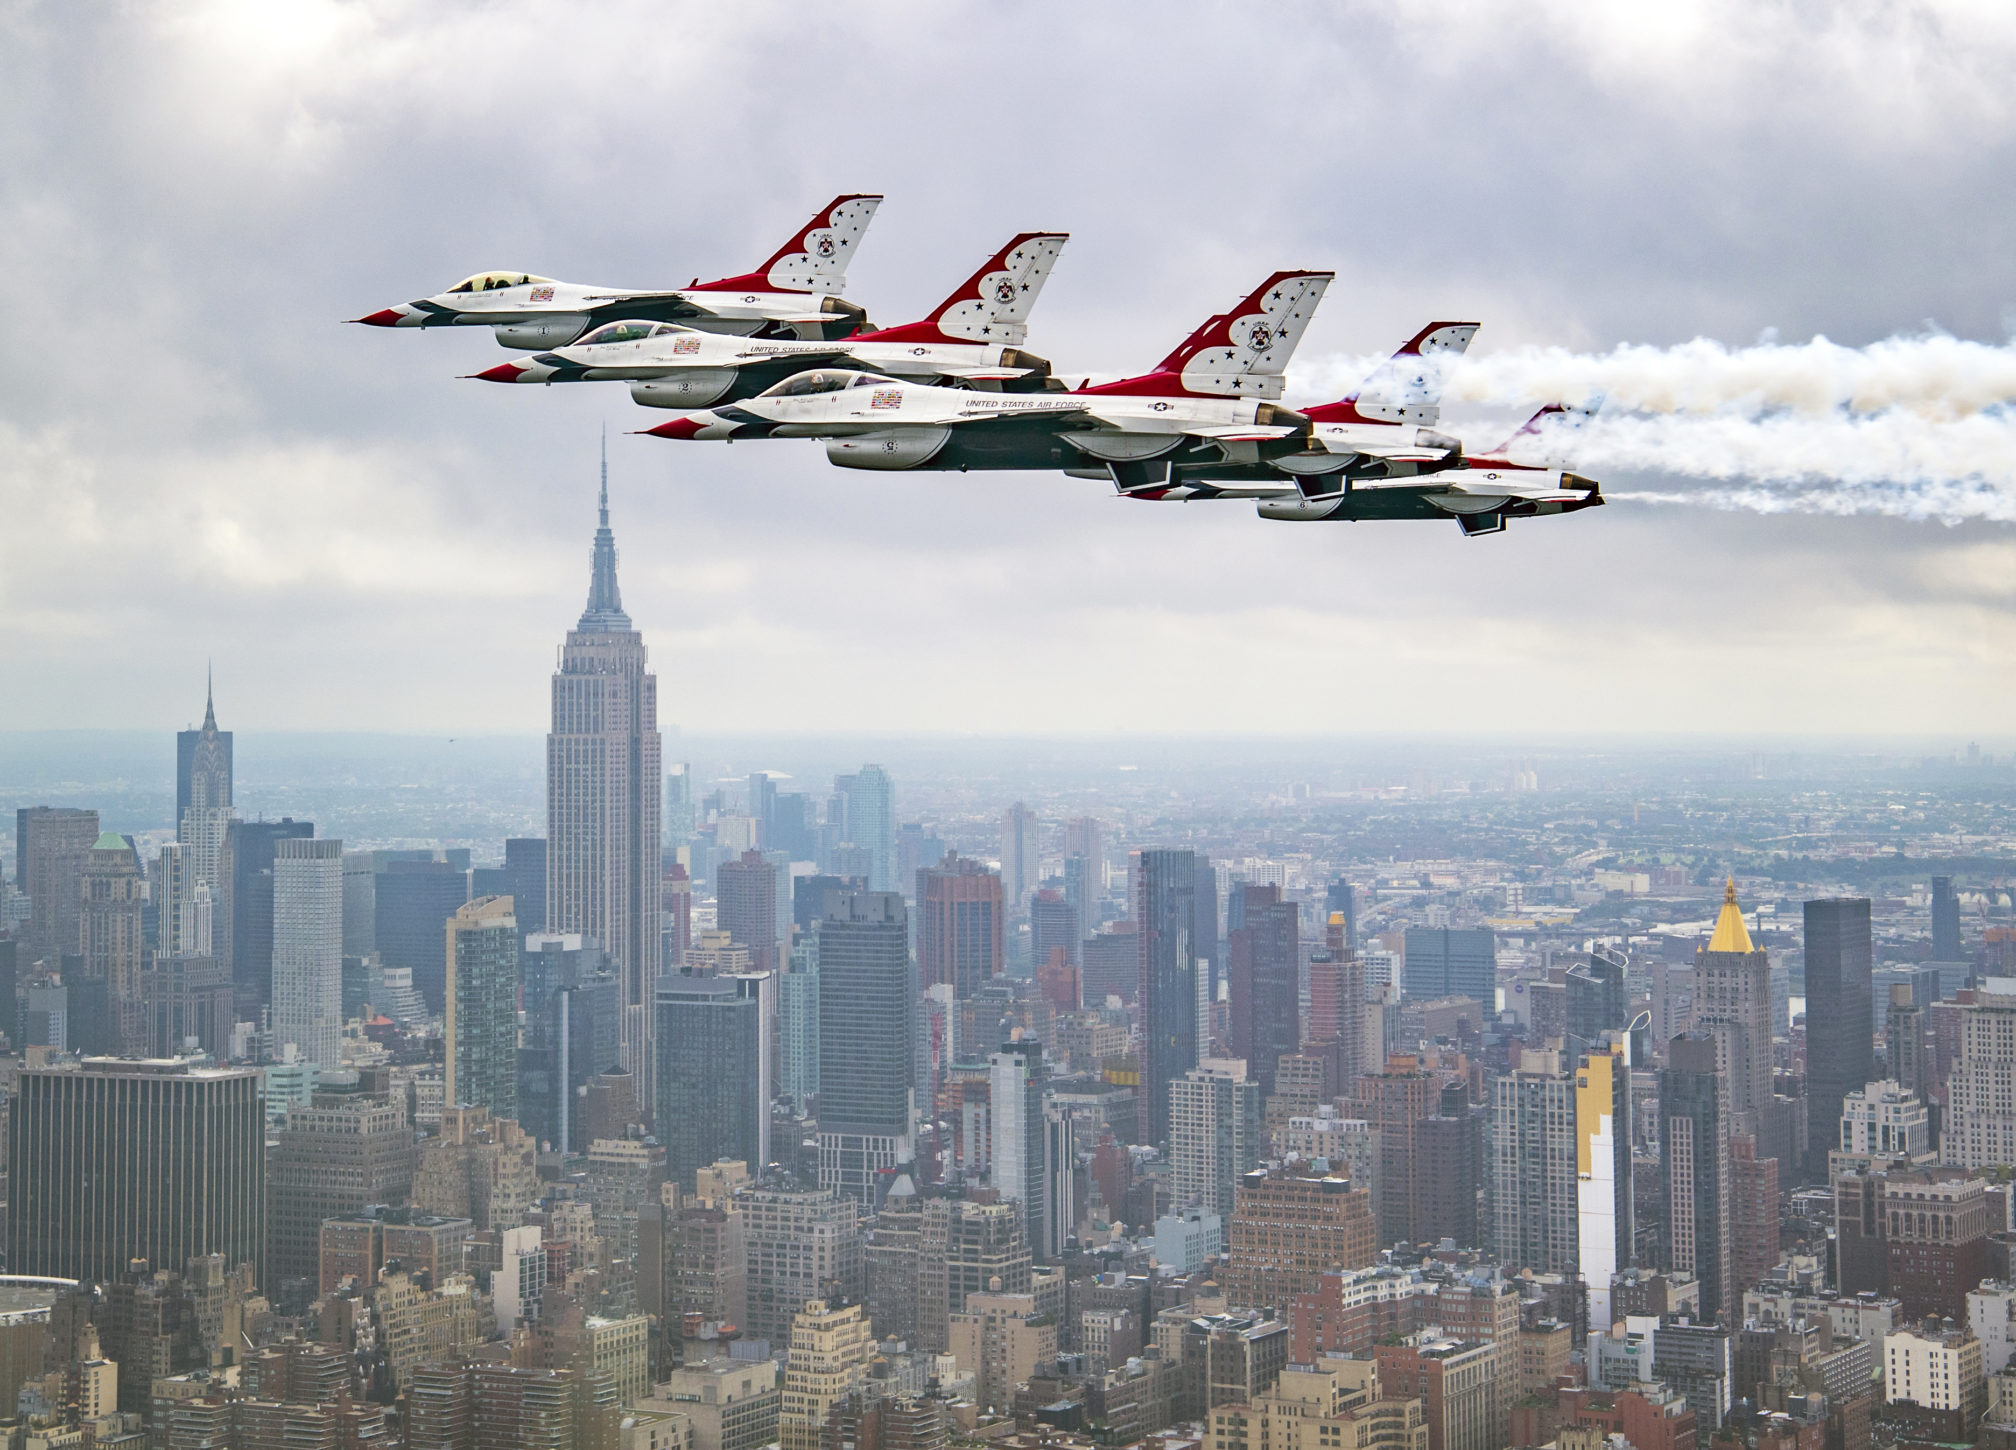 Where to see Thursday’s 24jet military air show from Brooklyn